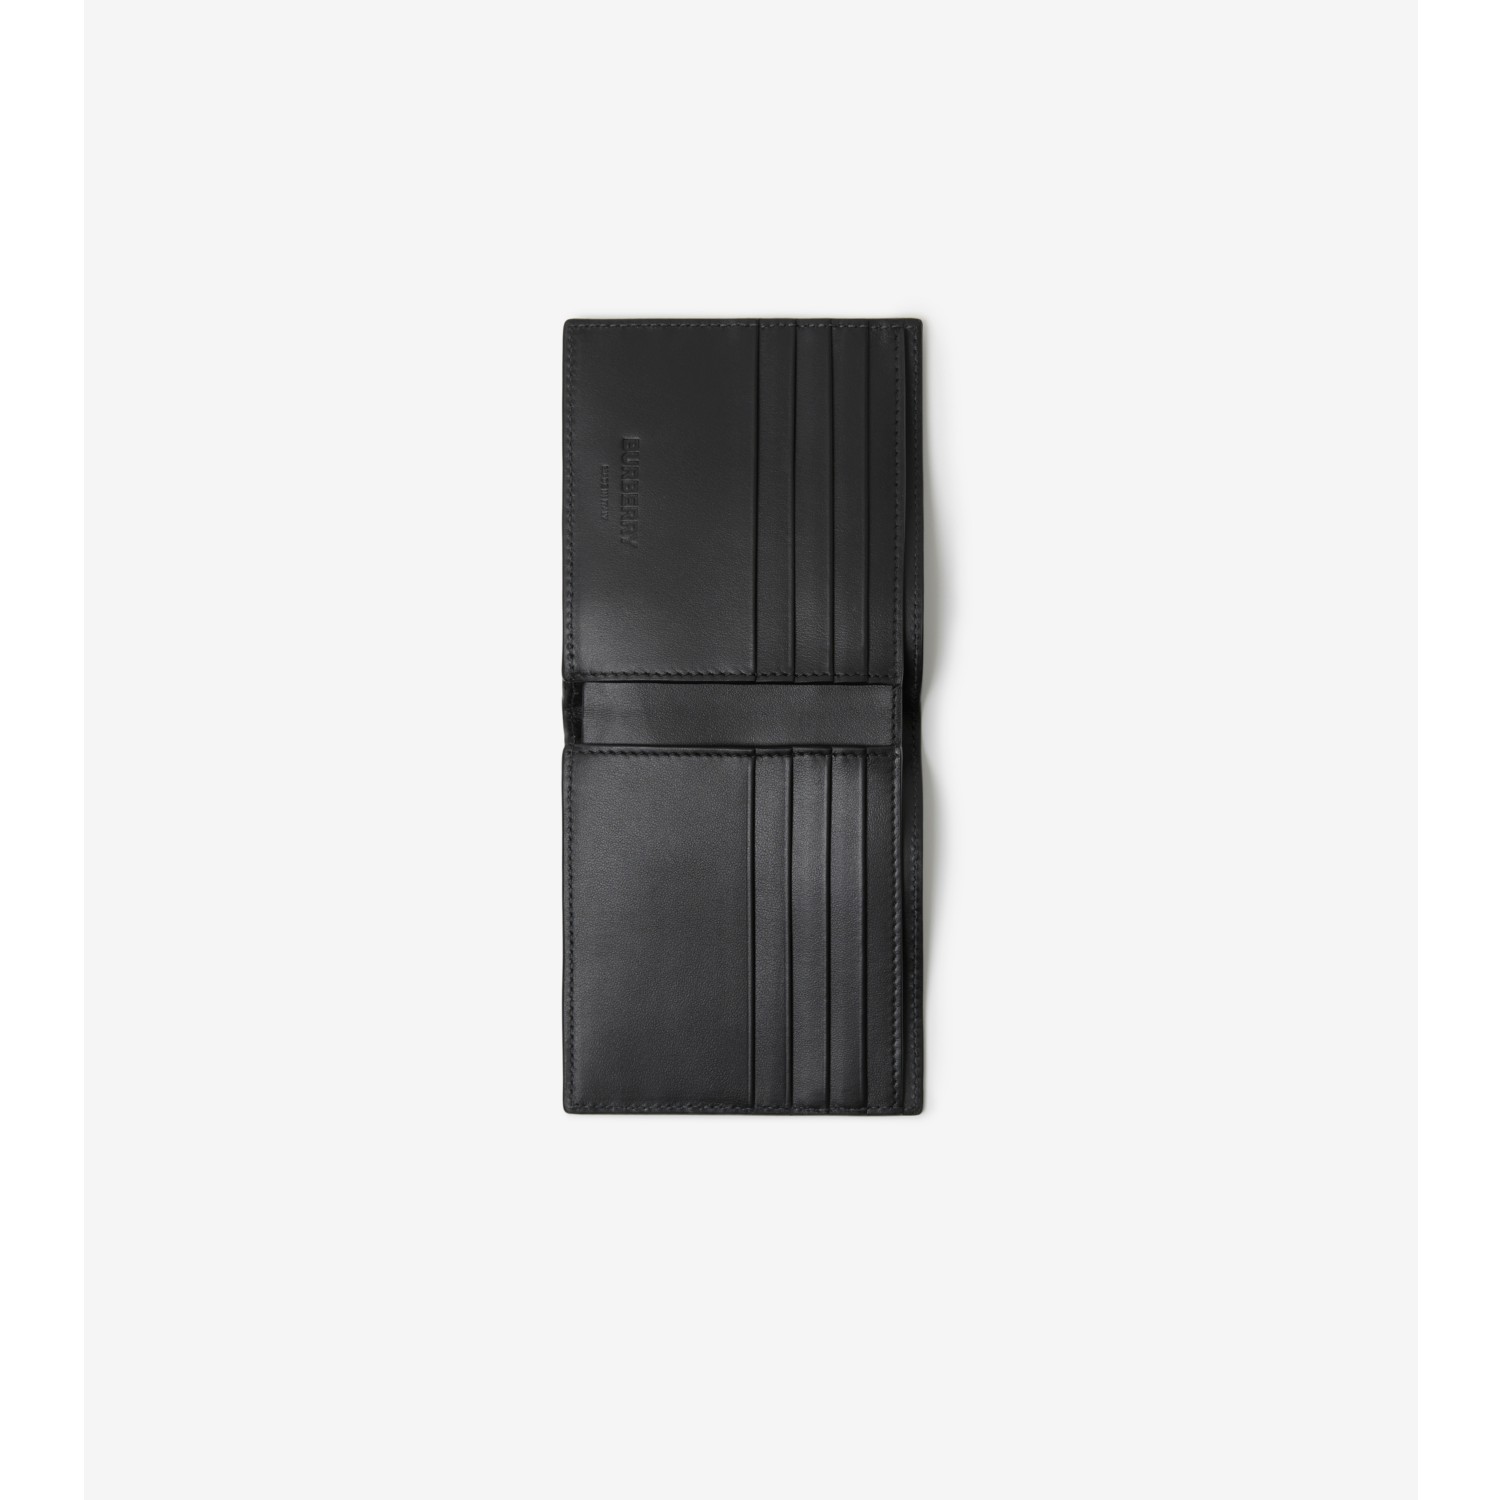 Burberry Black Leather Tb Wallet for Men